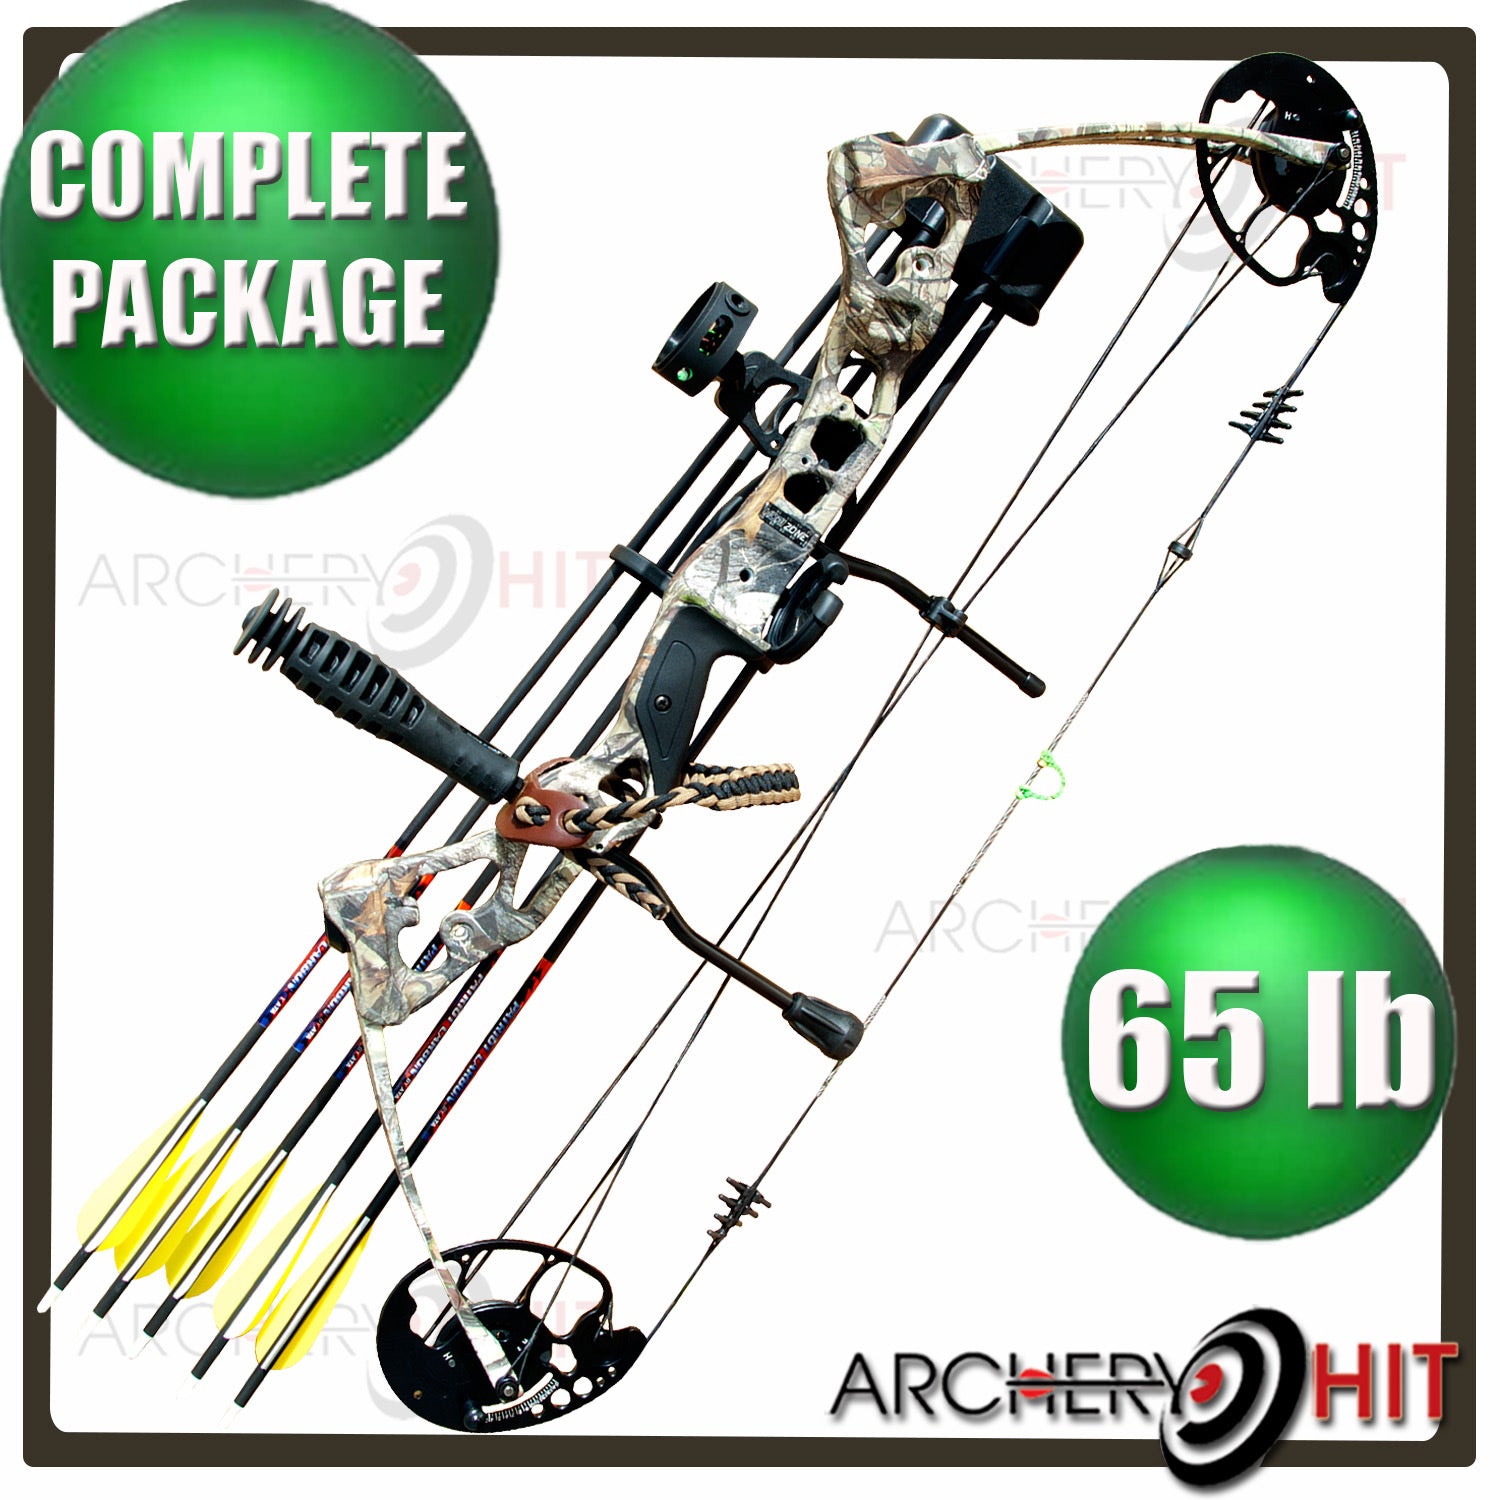 Vulture Compound Bow 65lb RTS Package from Archery Hit